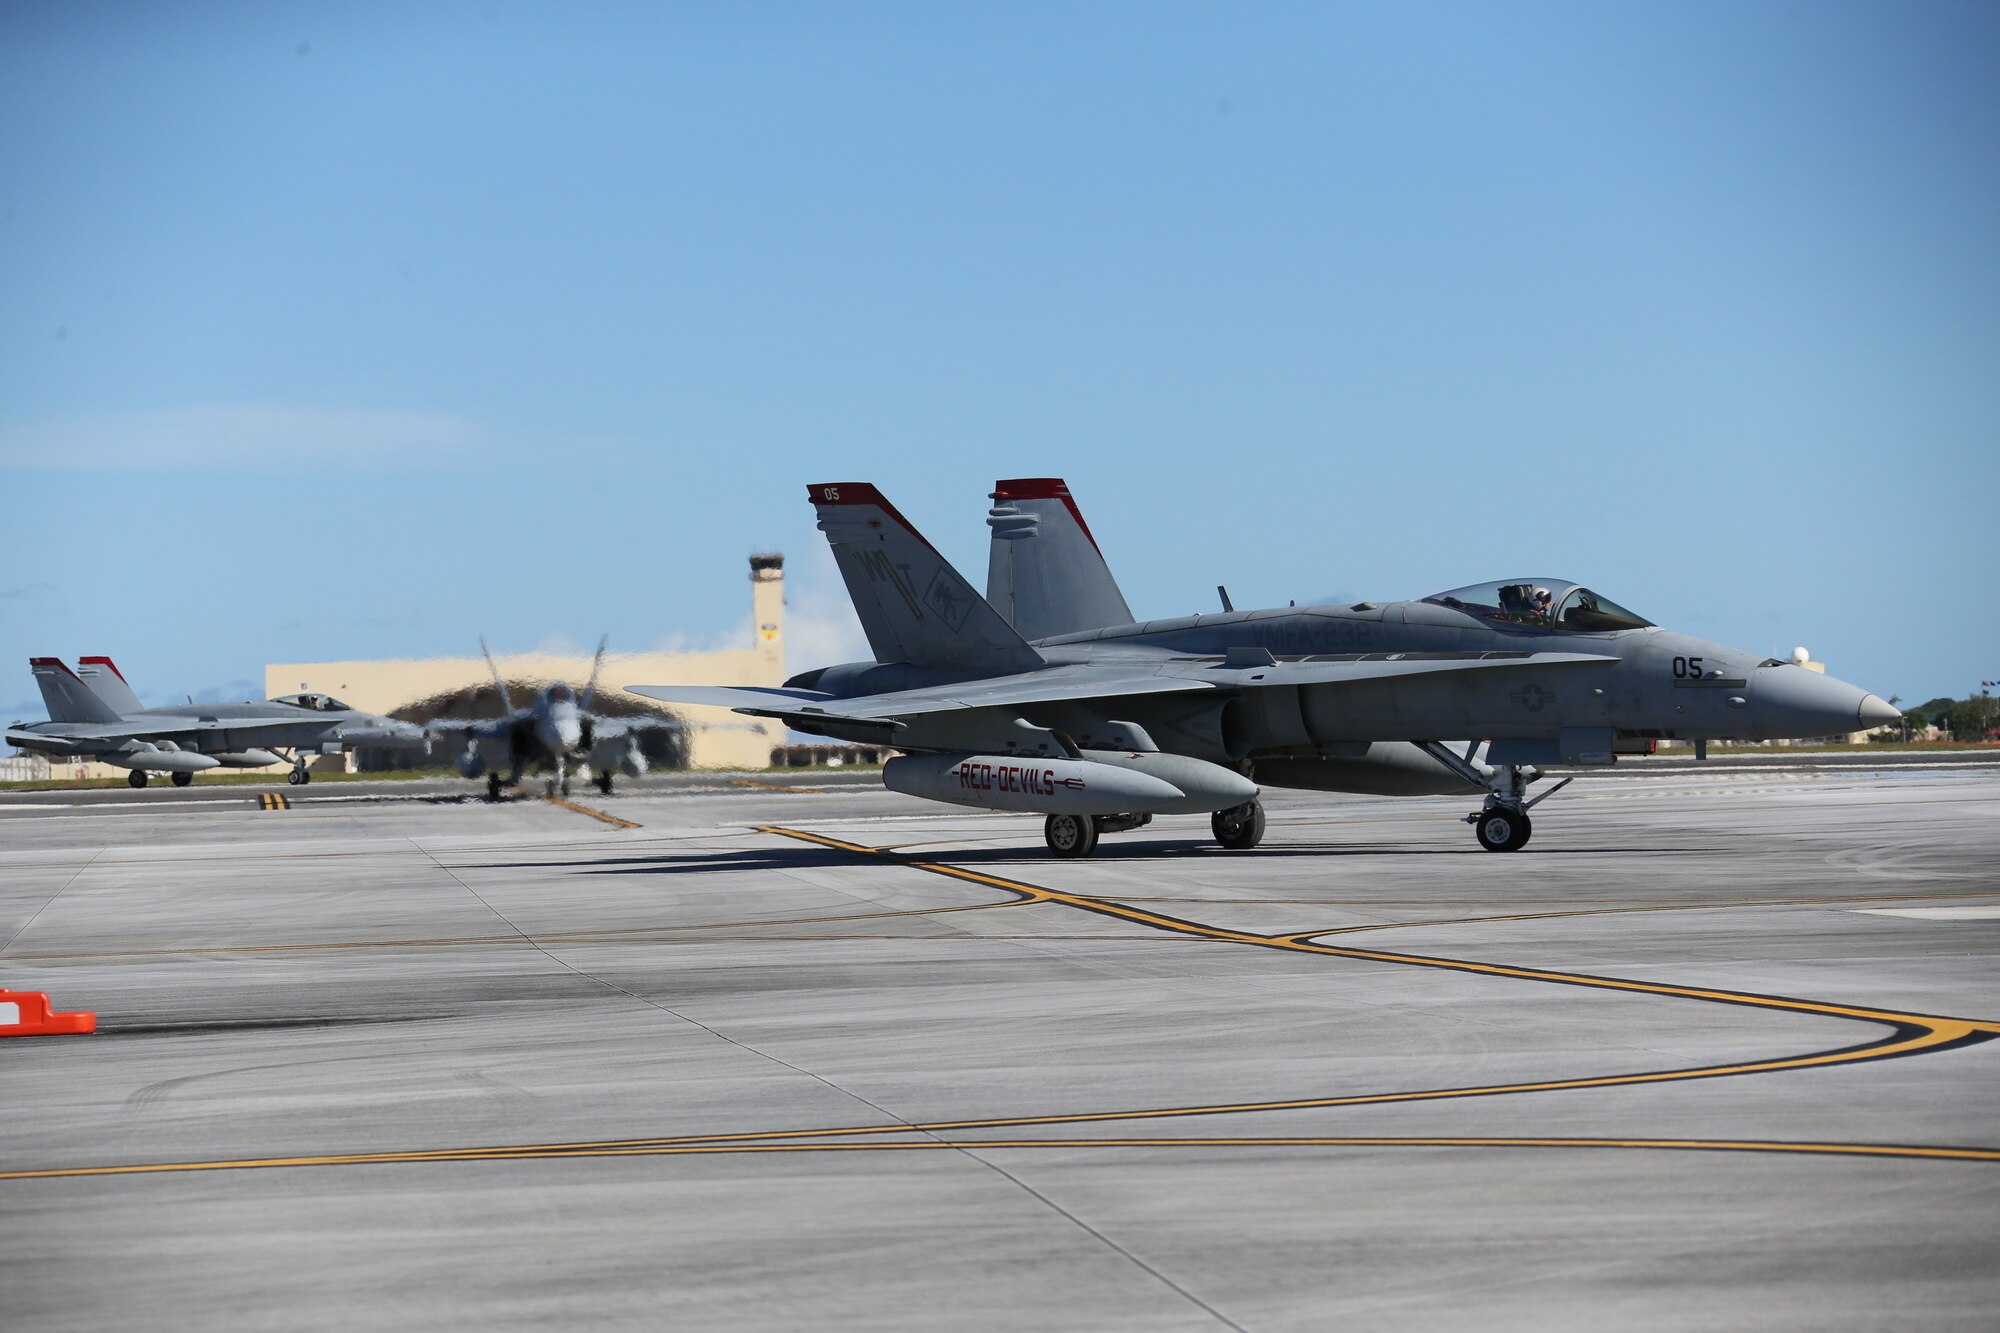 Marine Fighter Attack Squadron 232 arrives on Andersen Air Force Base, Guam to conduct training and participate in regional exercises, June 16, 2021. The training and exercises enable the squadron to increase operational readiness, improve interoperability and meet training requirements. Marine Corps Base Camp Blaz supports the squadron by providing them aviation hangars and spaces to perform maintenance and repair aircraft. MCB Camp Blaz continues to support units in the region by providing critical administrative and logistical support enabling them conduct training and maintain readiness.  (U.S. Marine Corps Photo by Gunnery Sgt. John Ewald)